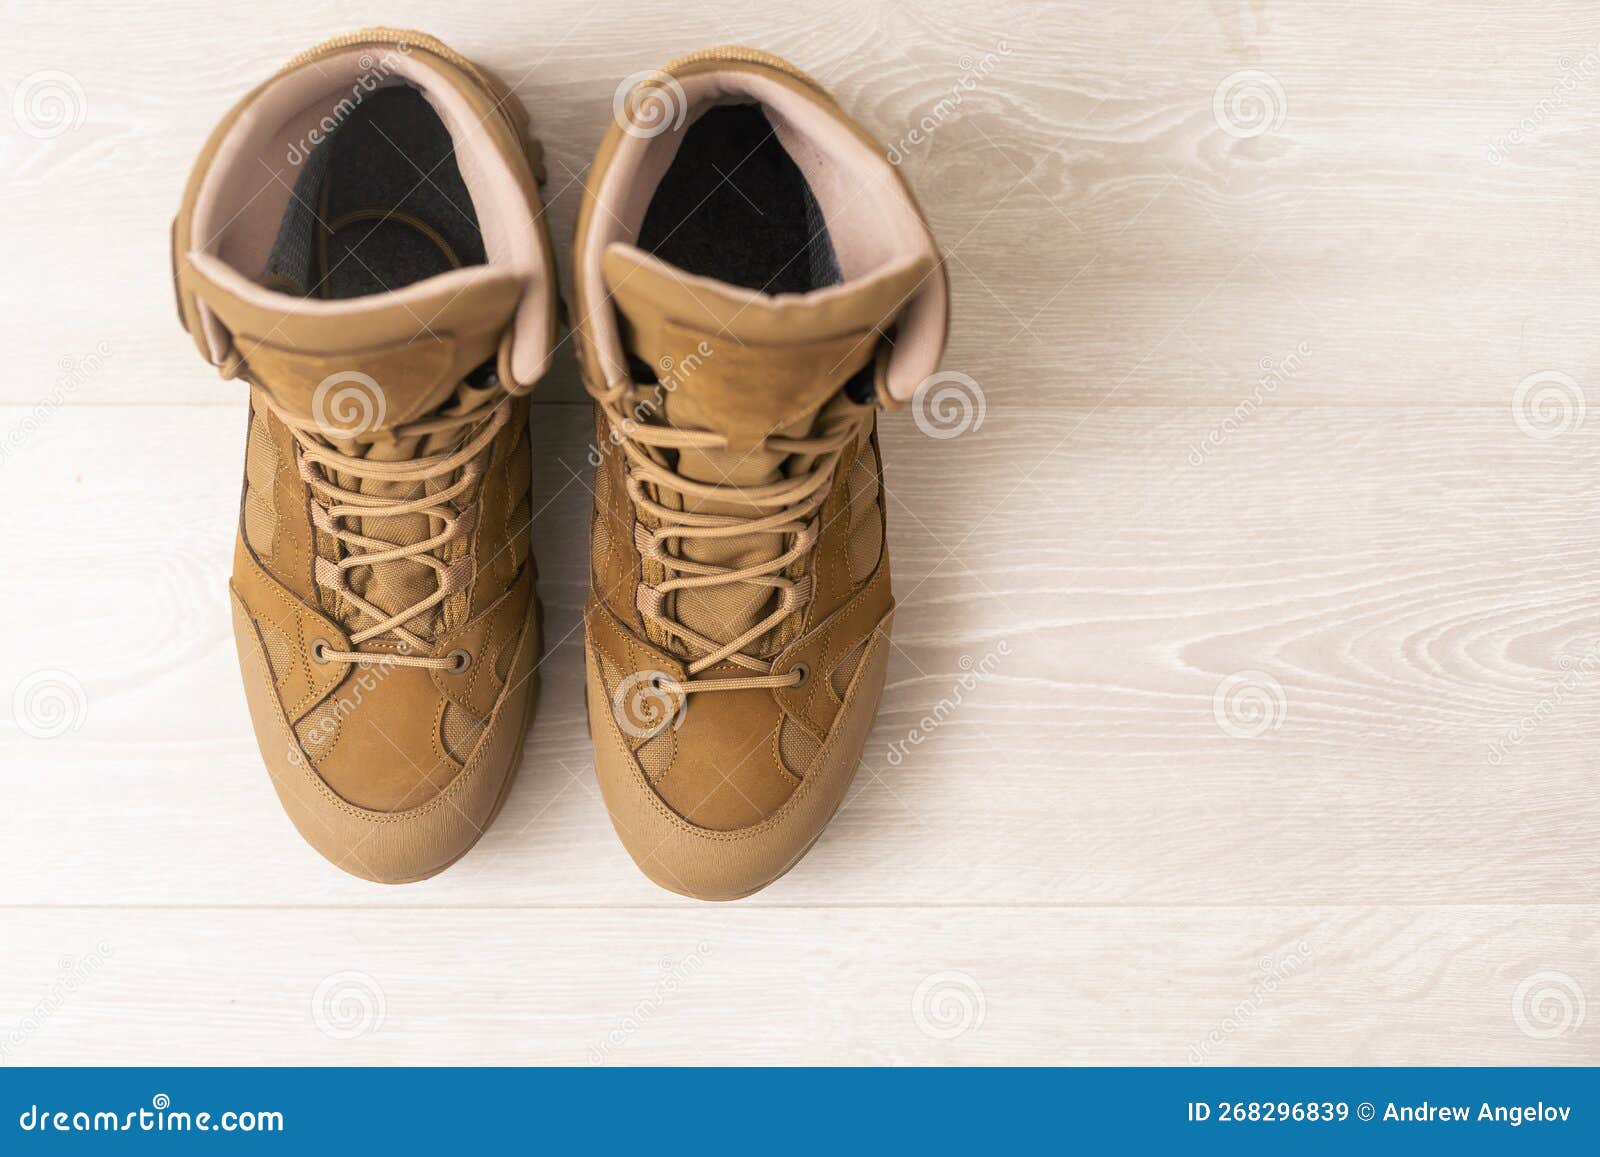 Tactical Military Boots for the Army. Stock Image - Image of muddy ...